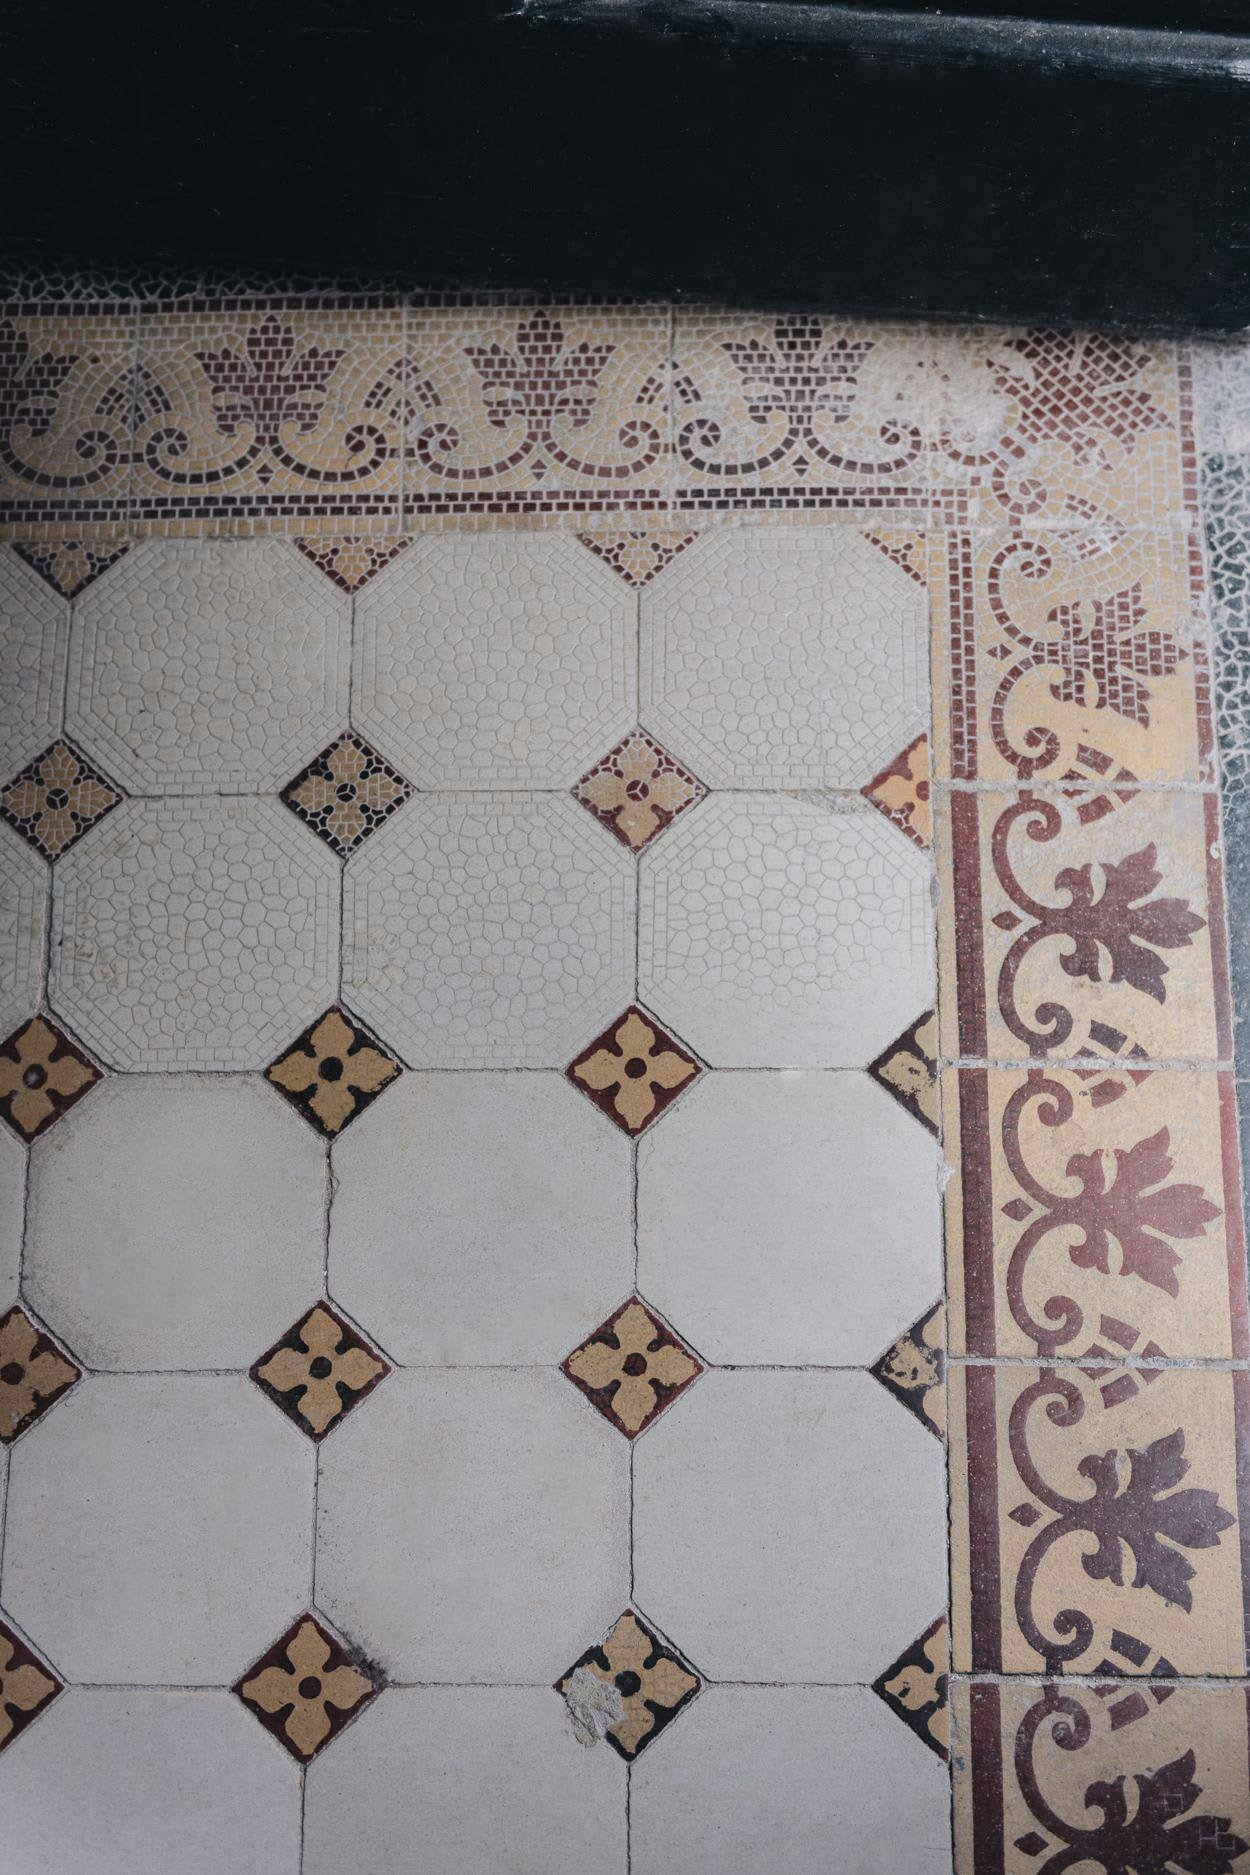 The image features a white and brown tile floor with a patterned design. The floor is covered in a variety of tiles, creating a visually appealing and unique appearance. The tiles are arranged in a pattern, with some tiles placed closer to the edges and others in the middle of the floor. The overall design of the tiles adds a sense of depth and texture to the floor, making it an interesting and eye-catching feature in the room.